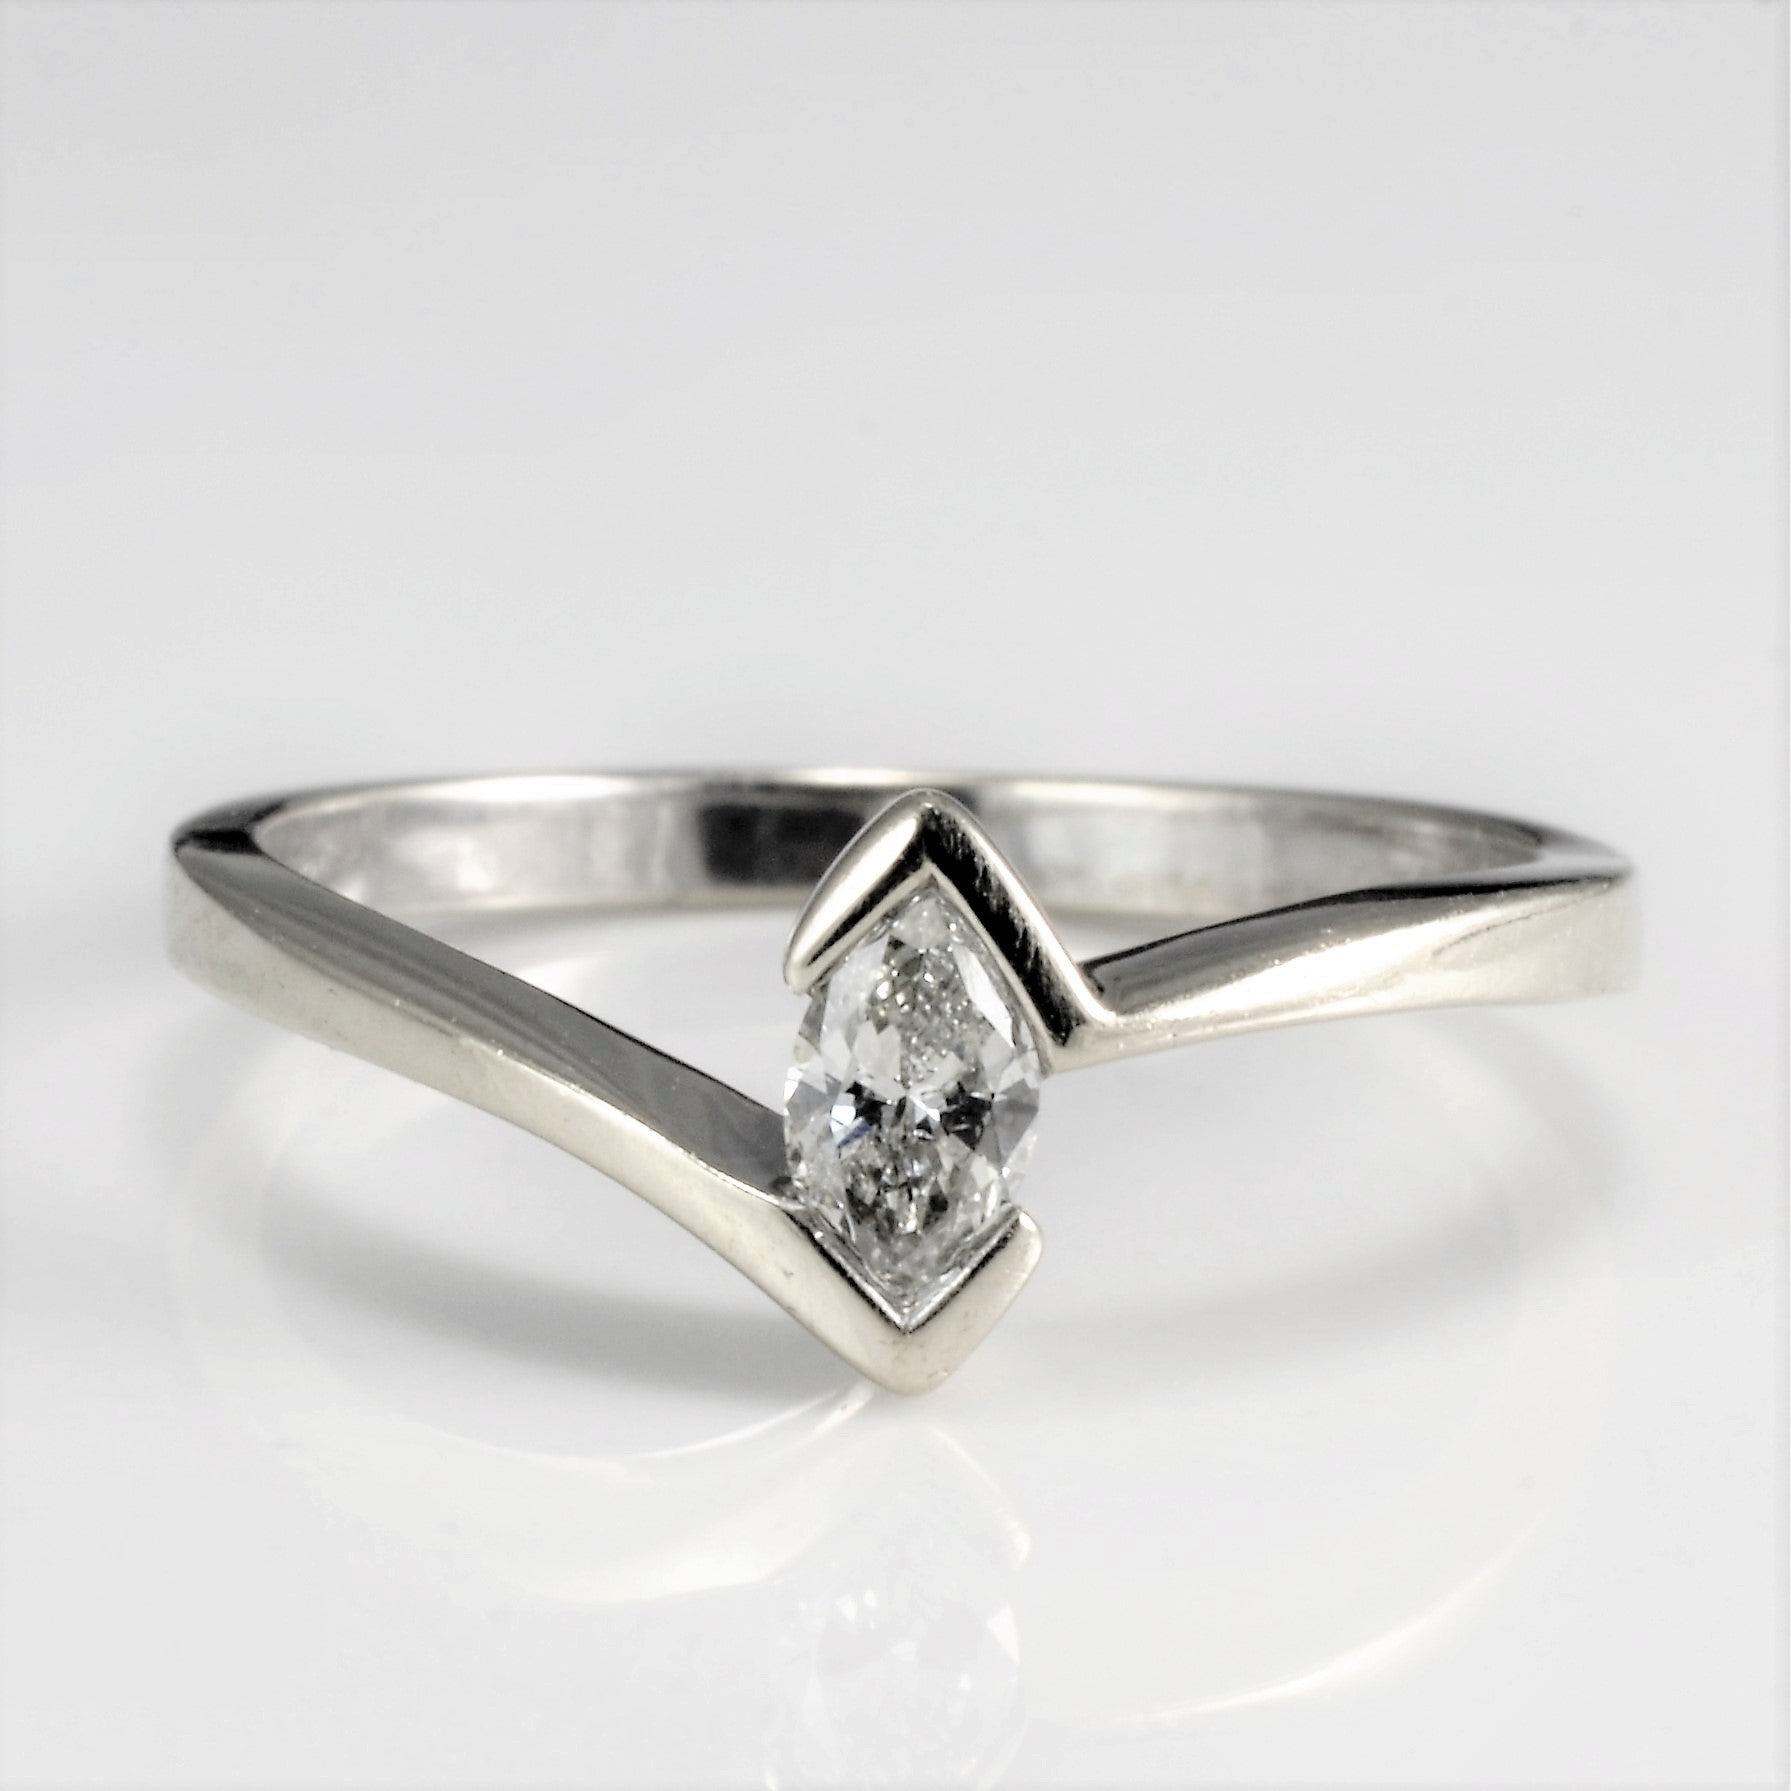 Bypass Solitaire Diamond Engagement Ring | 0.15 ct, SZ 4.75 |